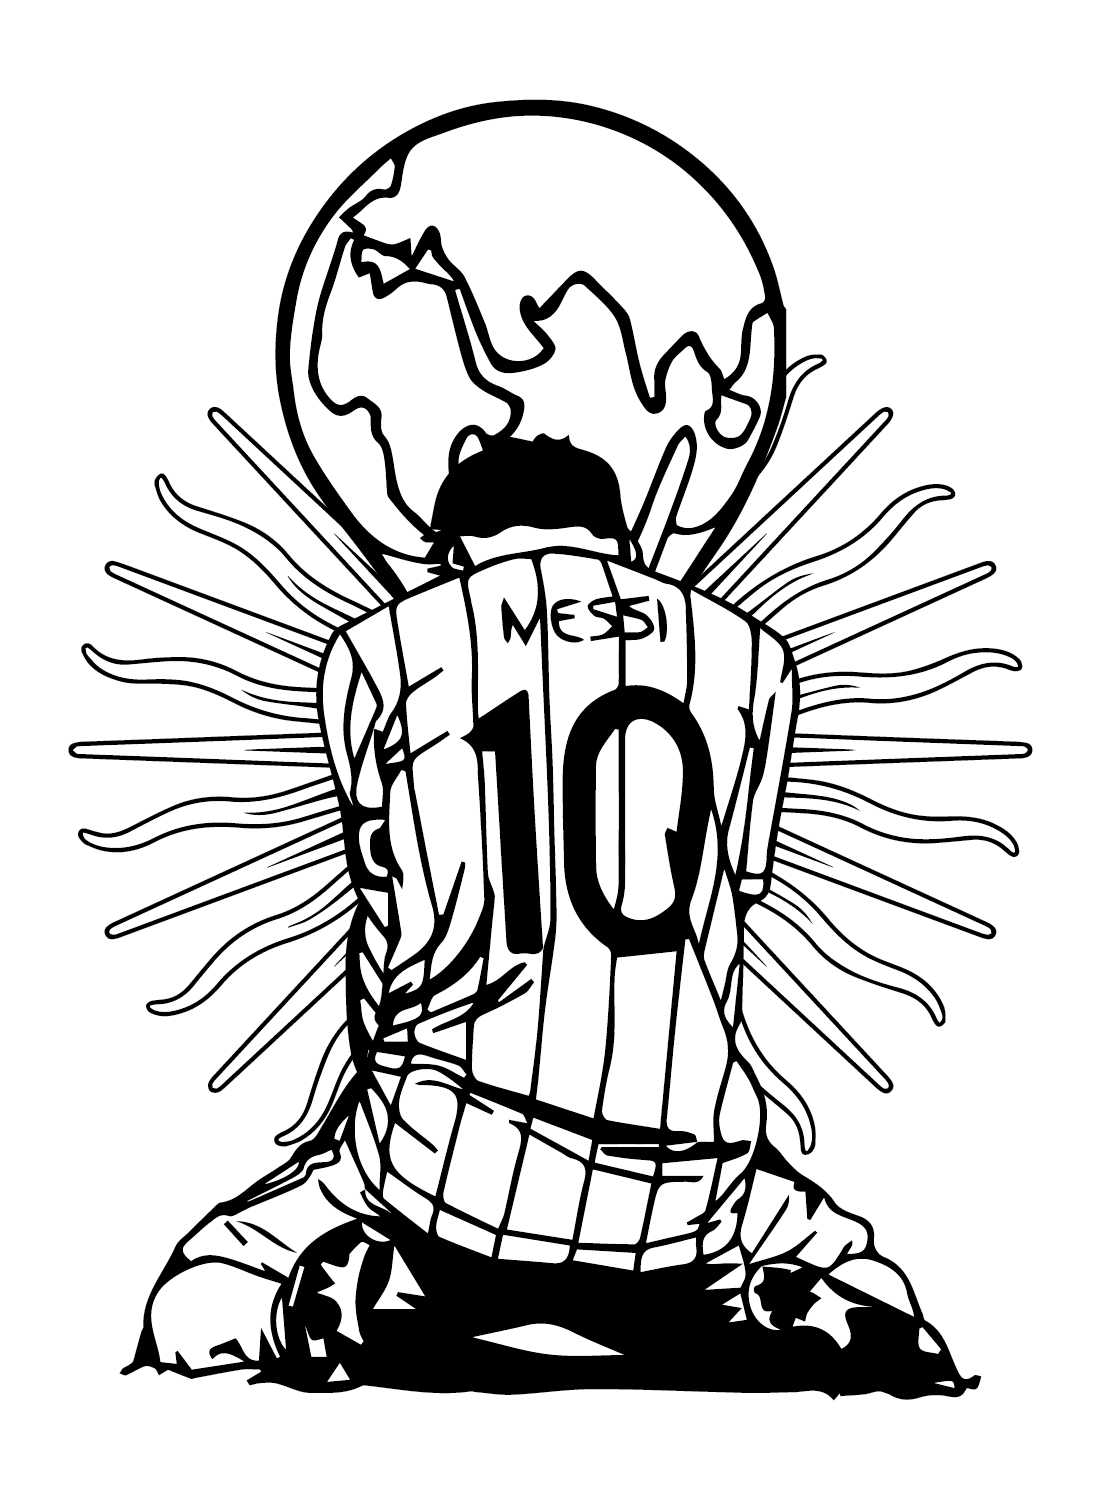 Messi to Print Coloring Pages